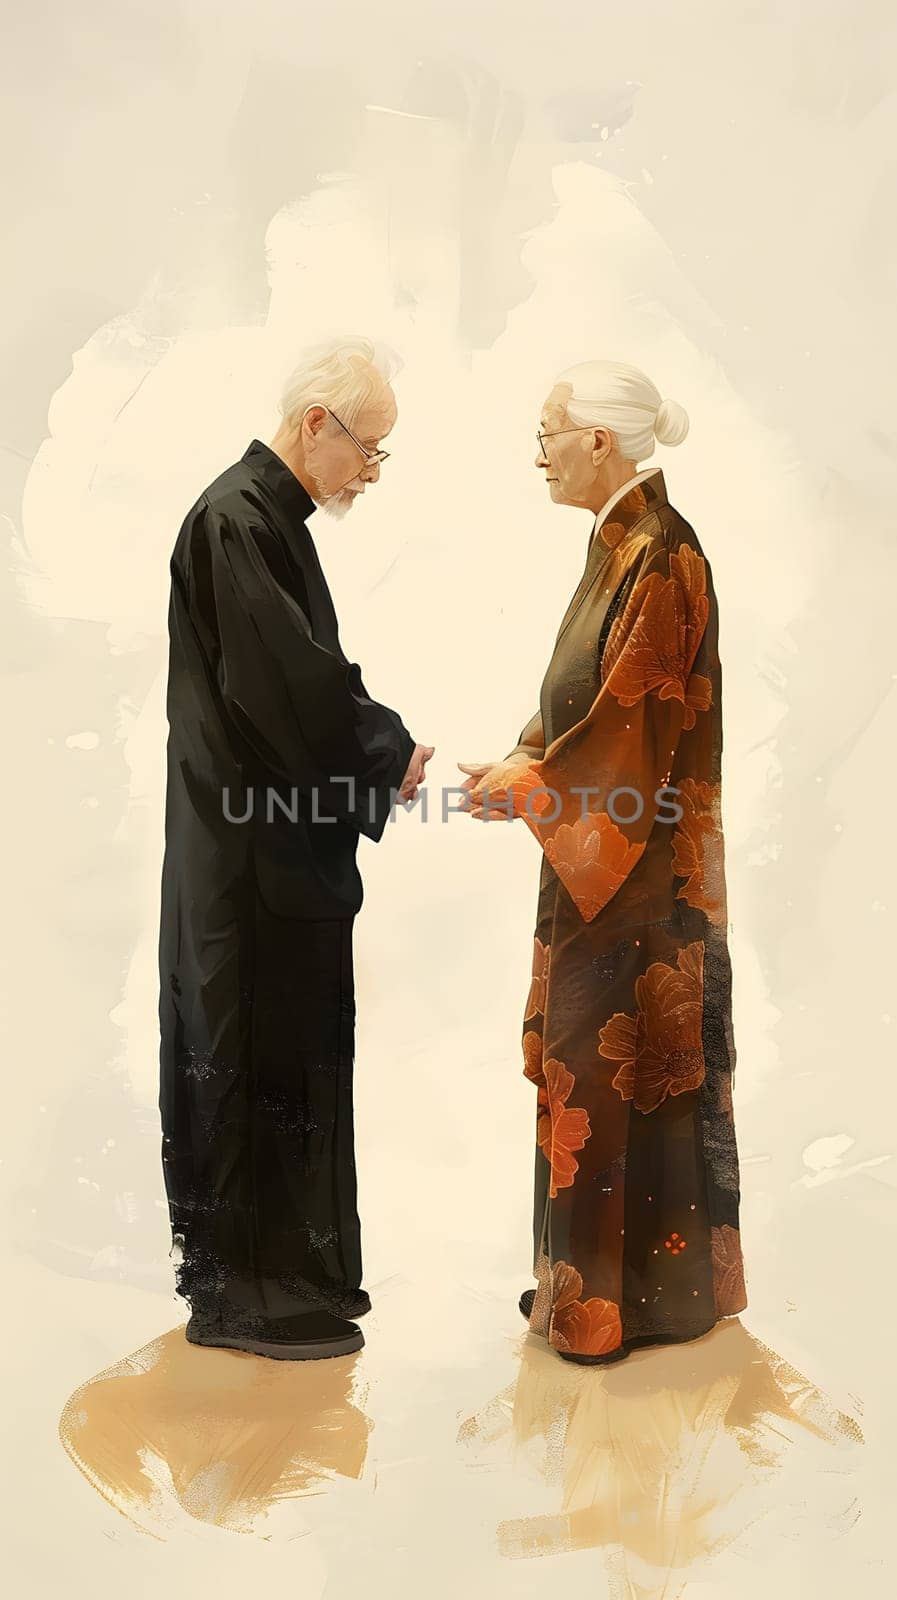 A man and a woman in formal wear are standing next to each other, holding hands. Their gesture of sharing this special moment together is like a beautiful painting in the visual arts